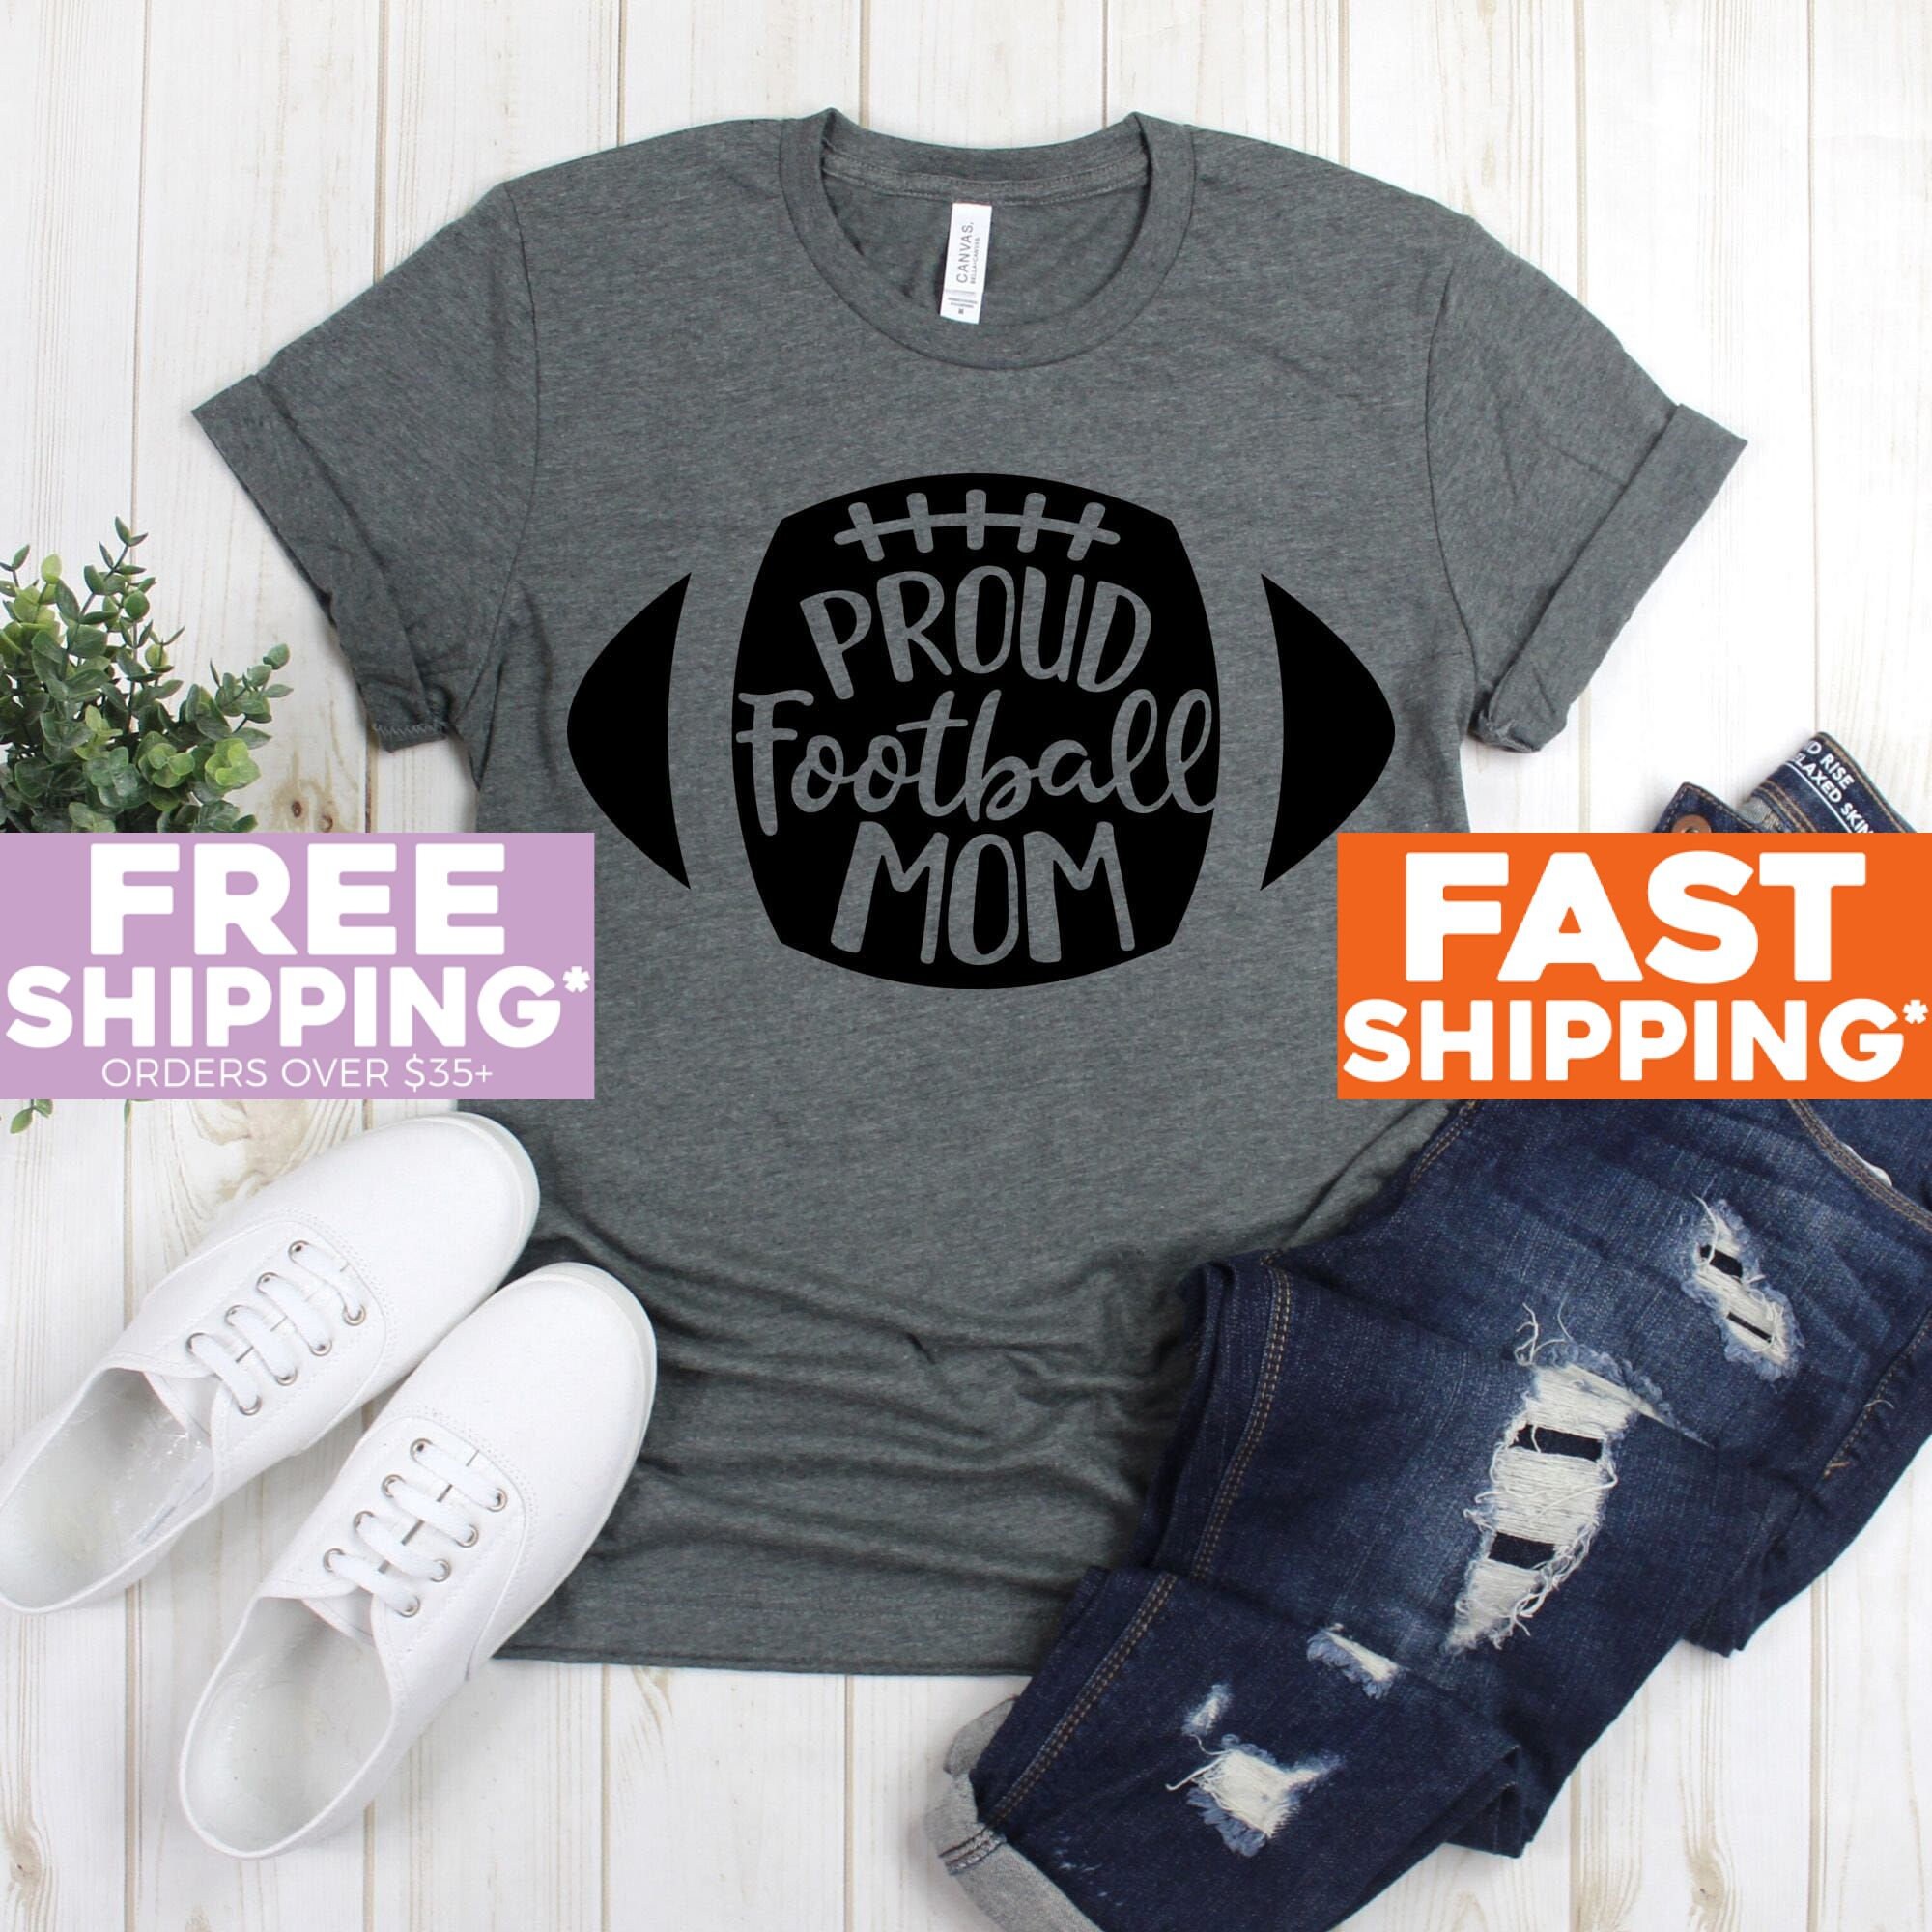 DIY Party Mom: 10 Football Mom T-shirts to Show Your Pride